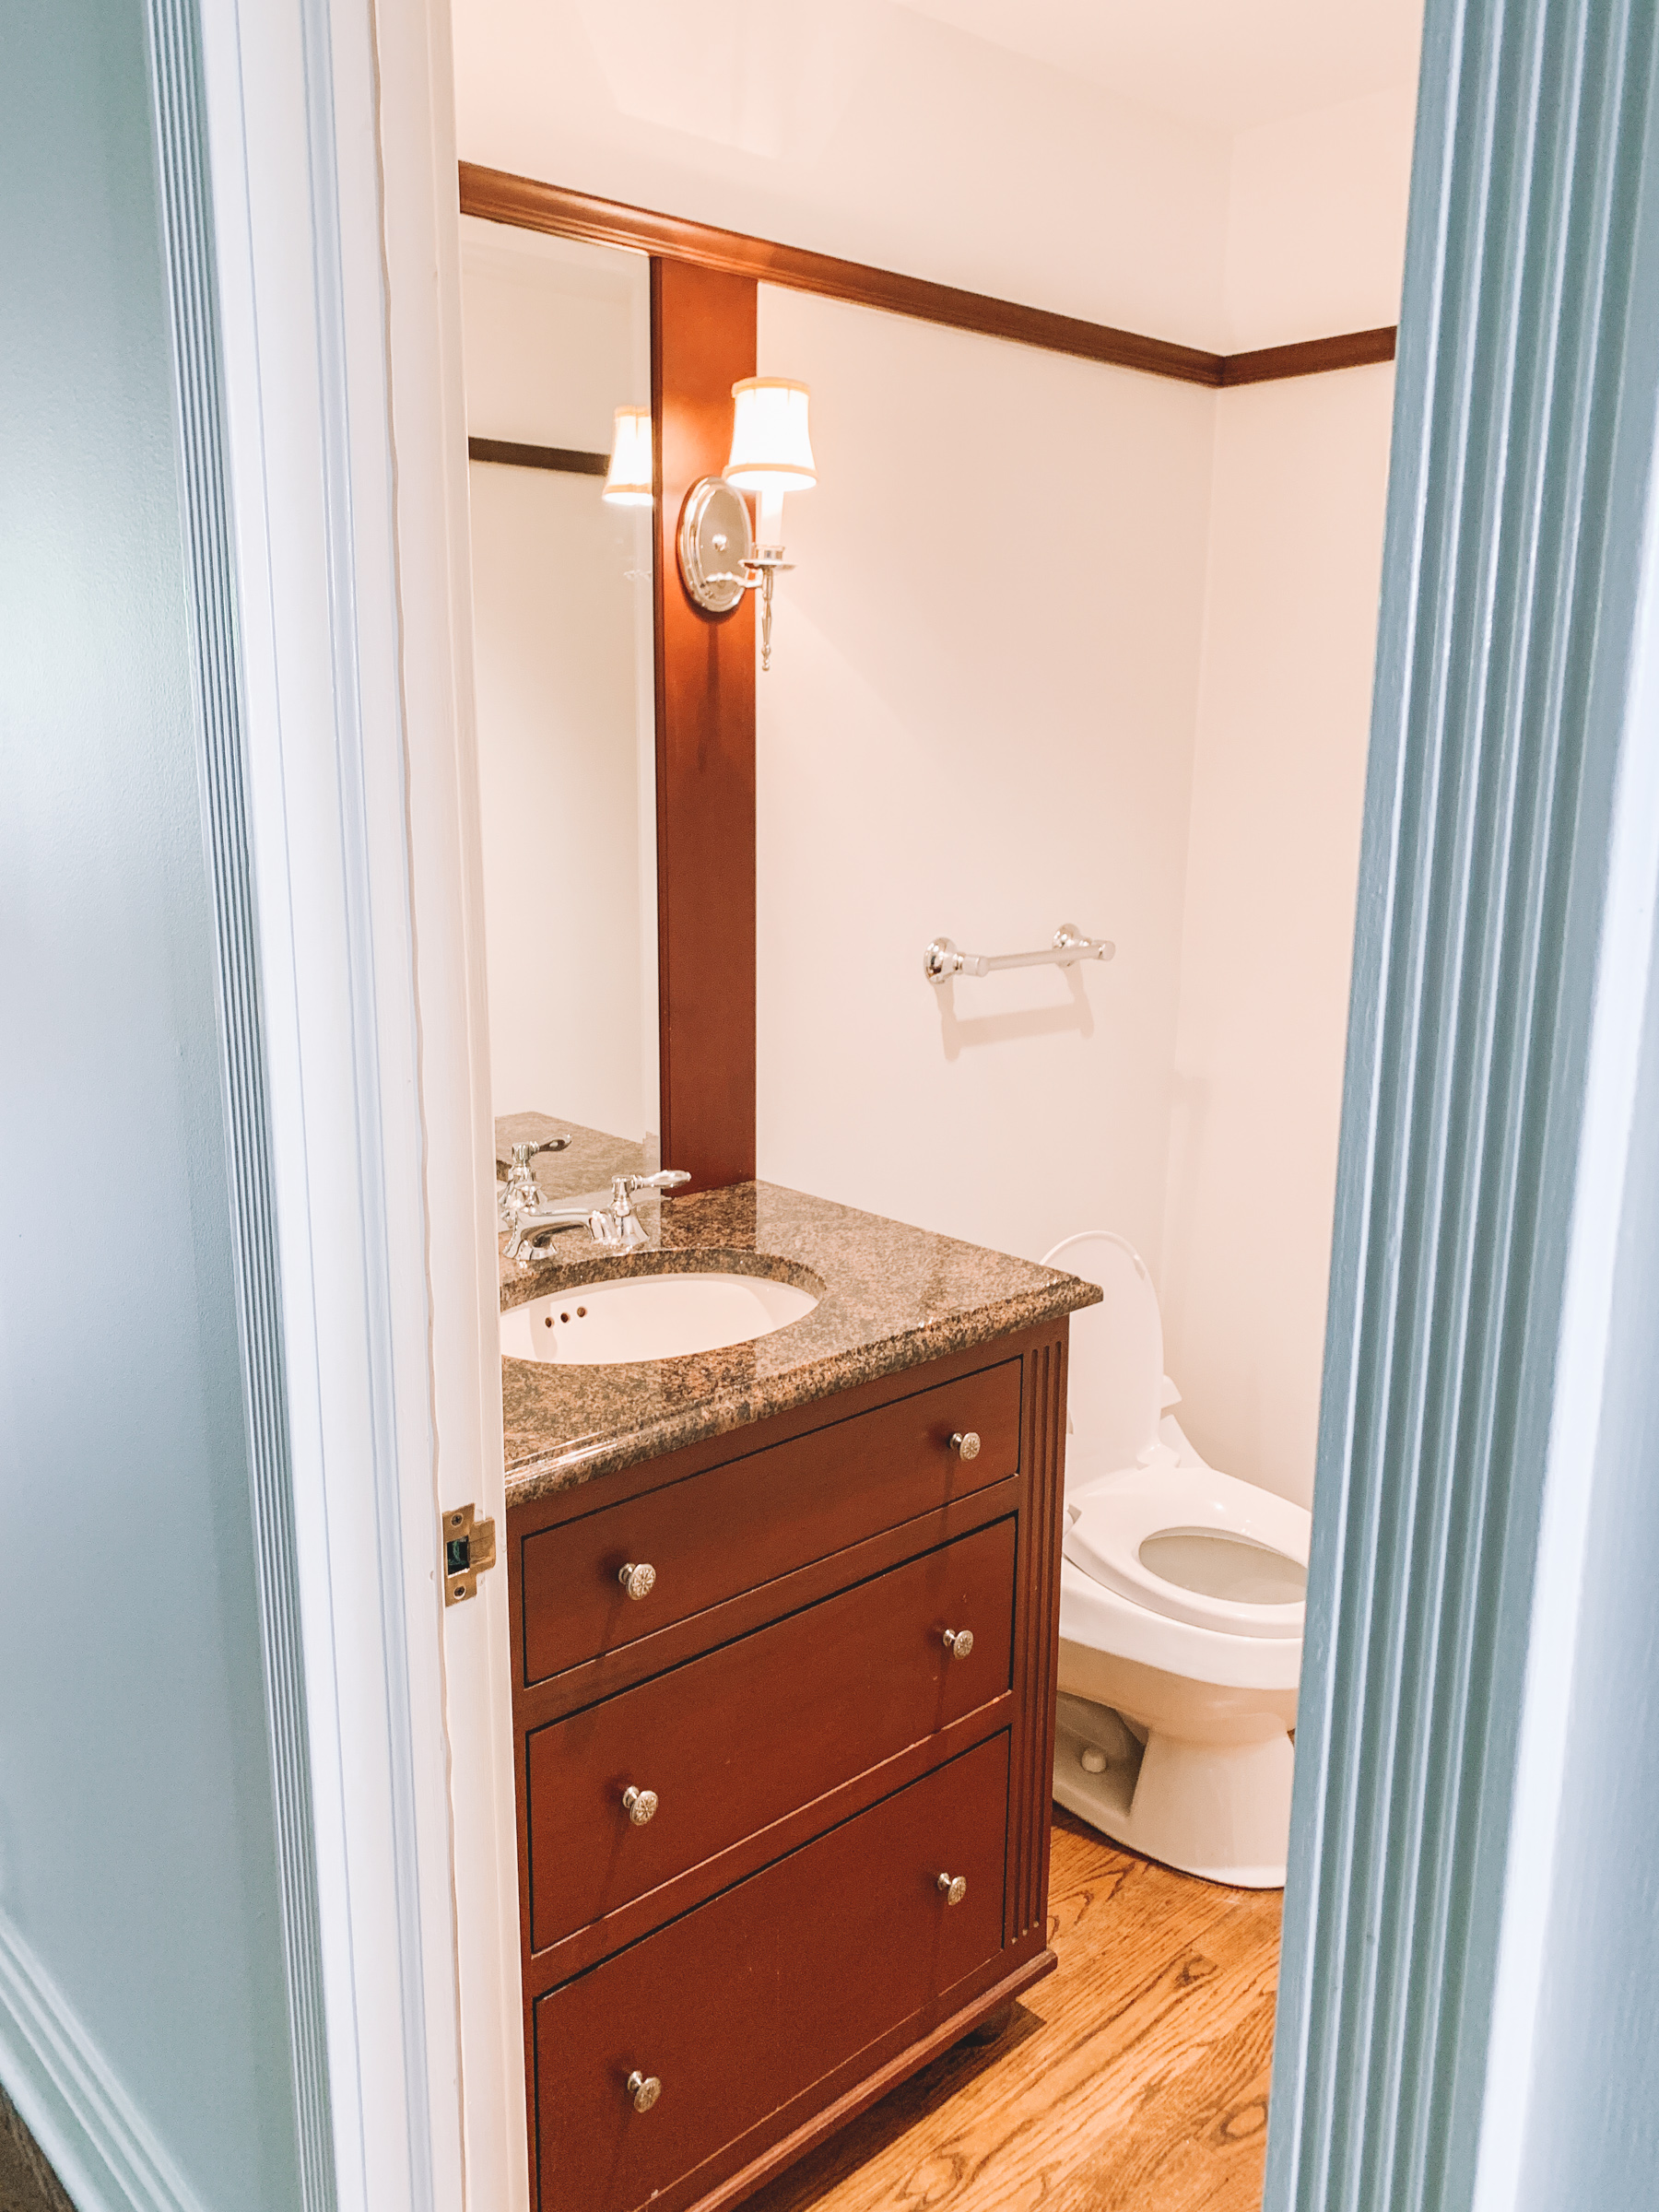 New Home Tour - Powder room - Kelly in the CIty